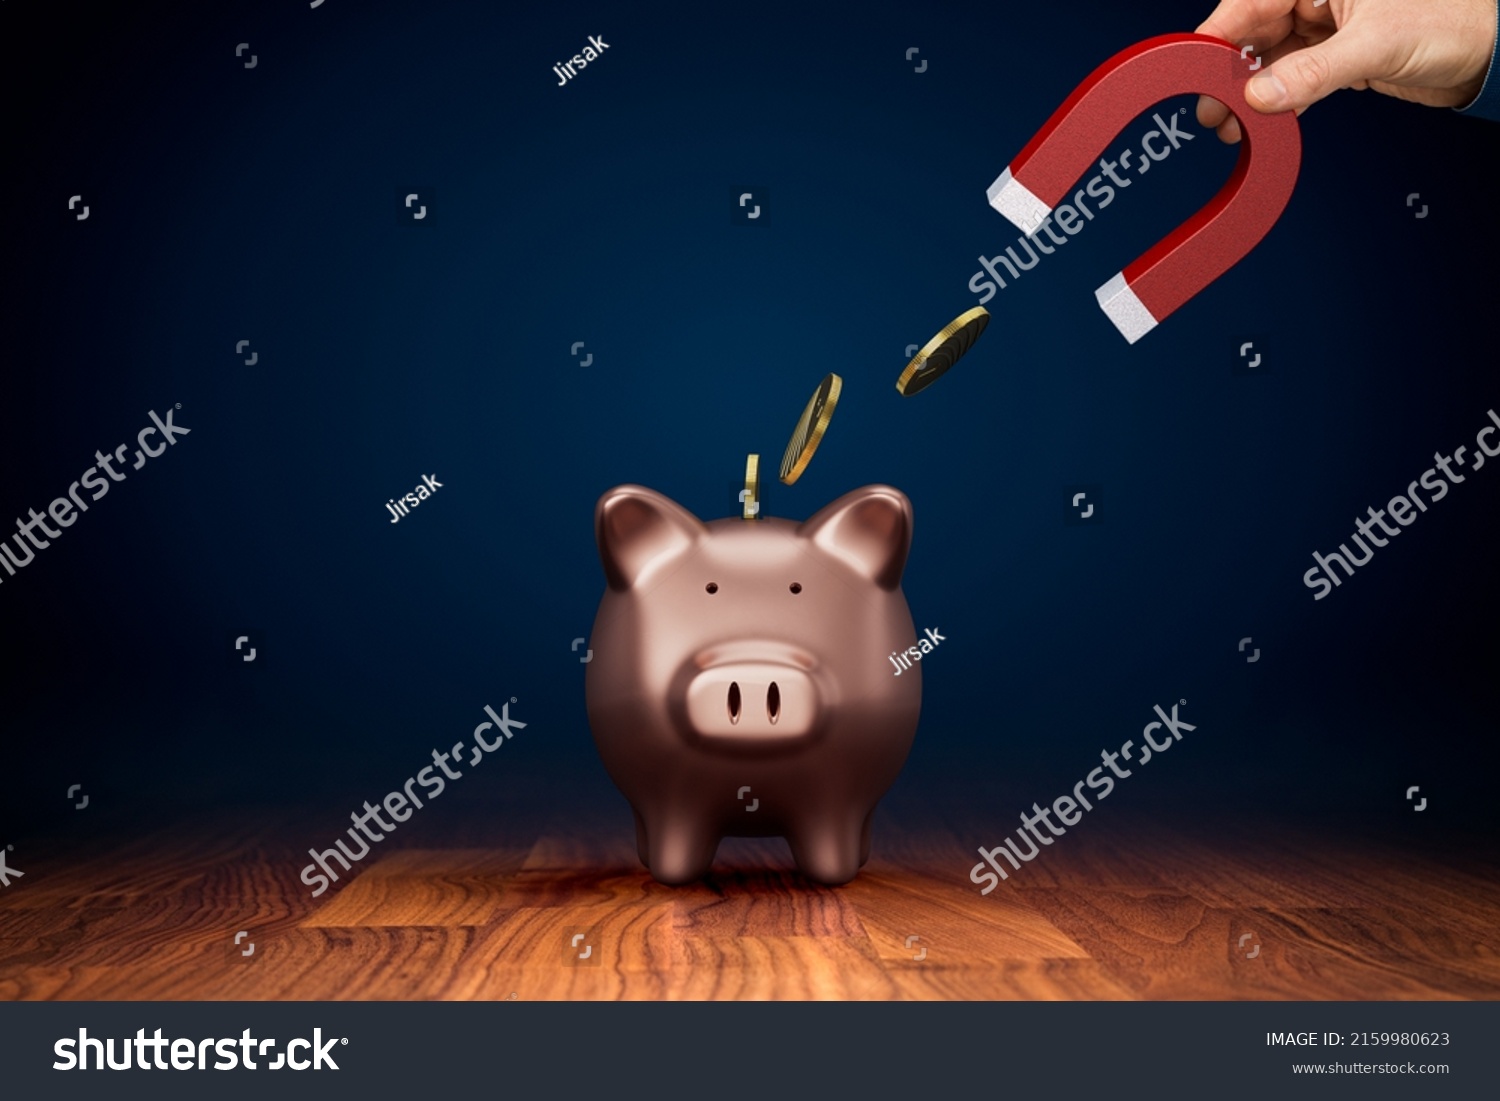 Inflation reduces the value of savings. Inflation concept with hand holding magnet takes away coins from piggy bank. Inflation is a threat to all savers. Tax, charge fee or handling charge concepts. #2159980623